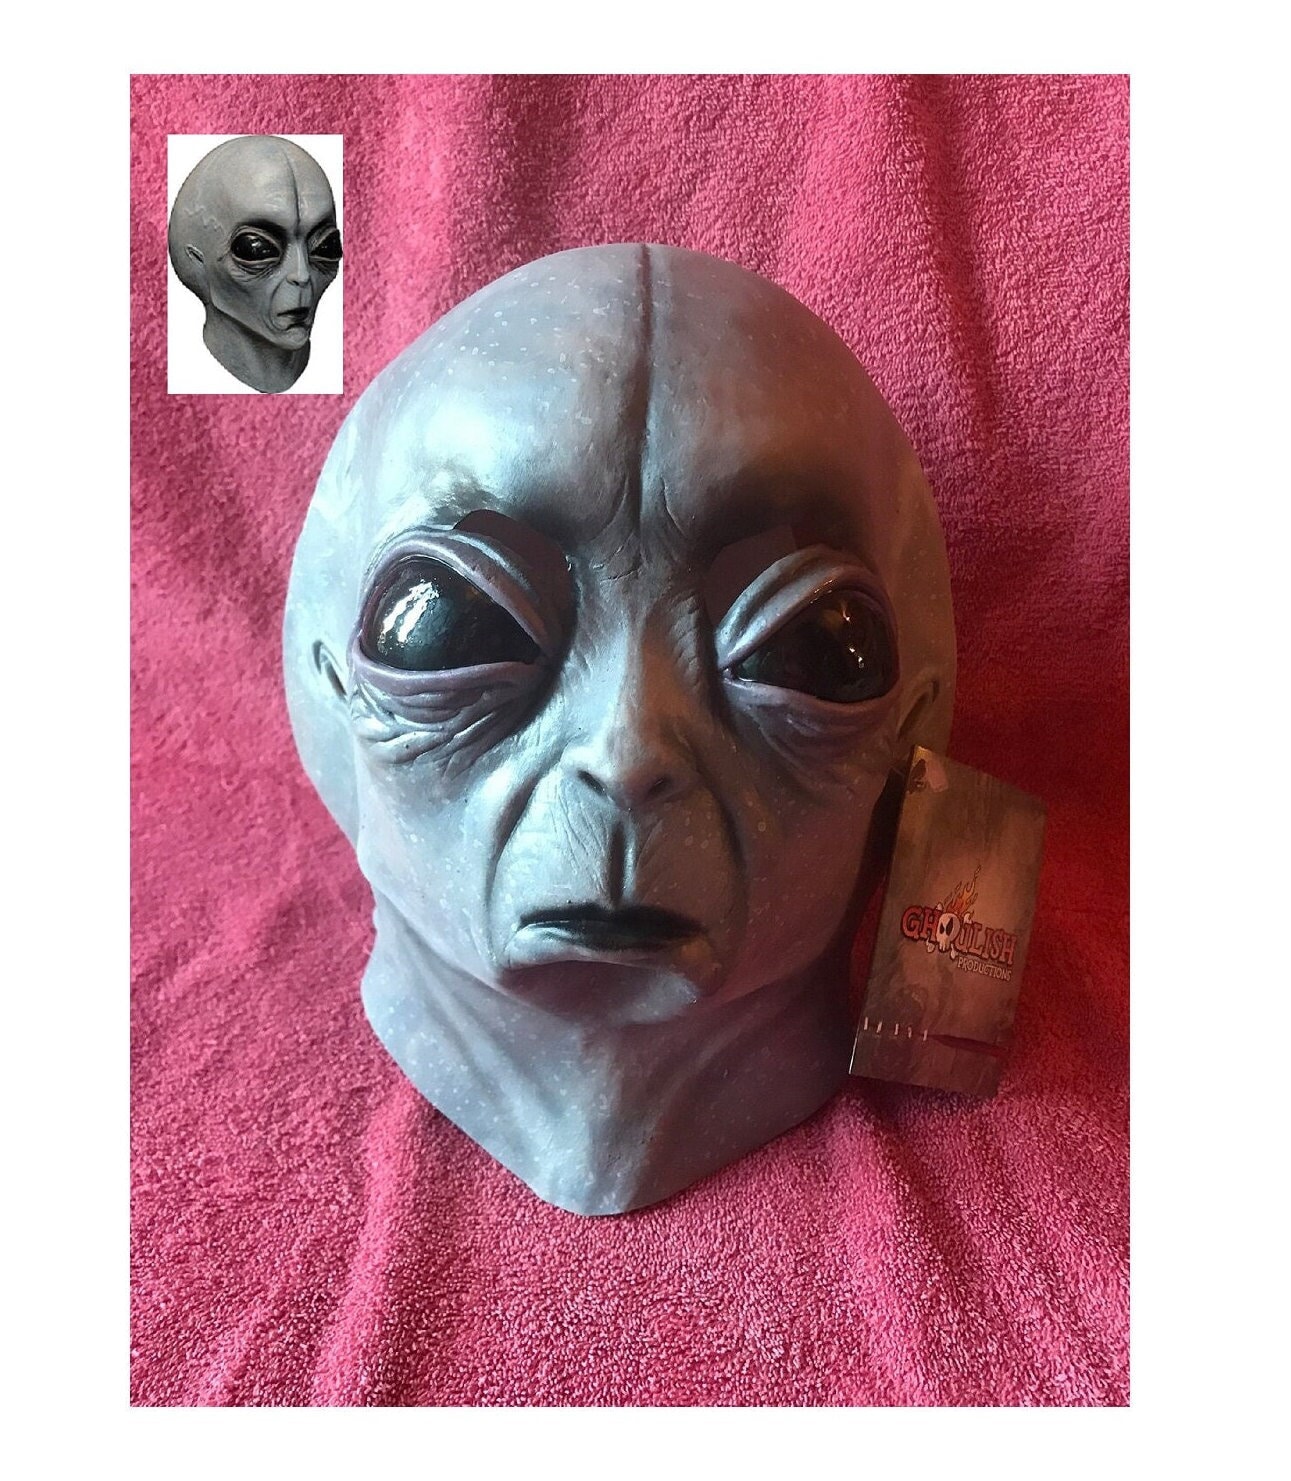 New AREA 51 ALIEN Latex Deluxe Mask Ghoulish Productions Free Shipping  Brand New Item -  Norway